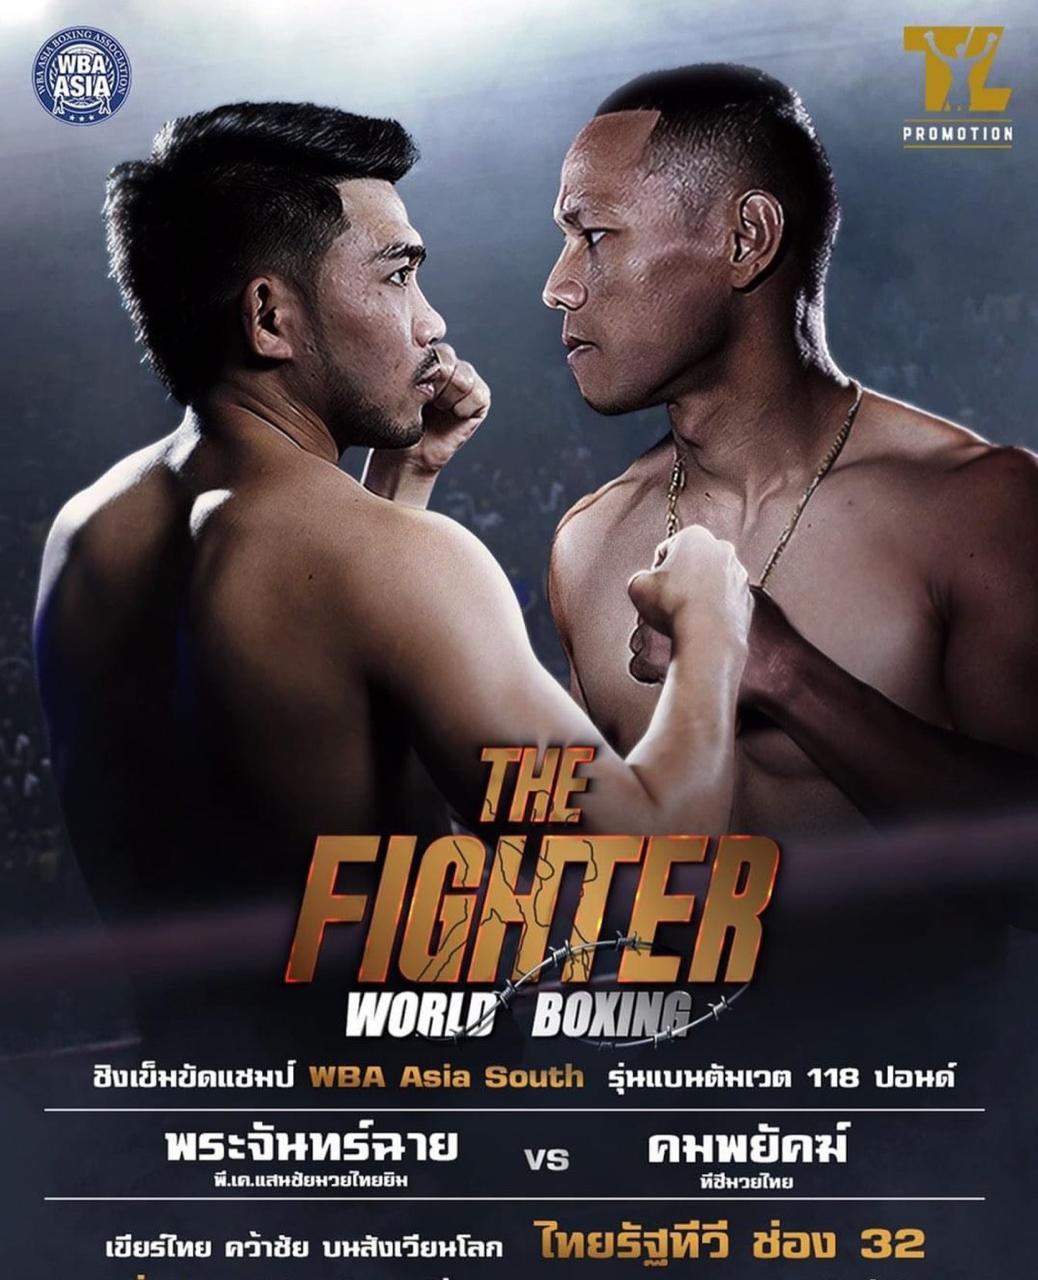 Petchnamthong-Satorn for the WBA South Asia title on Saturday